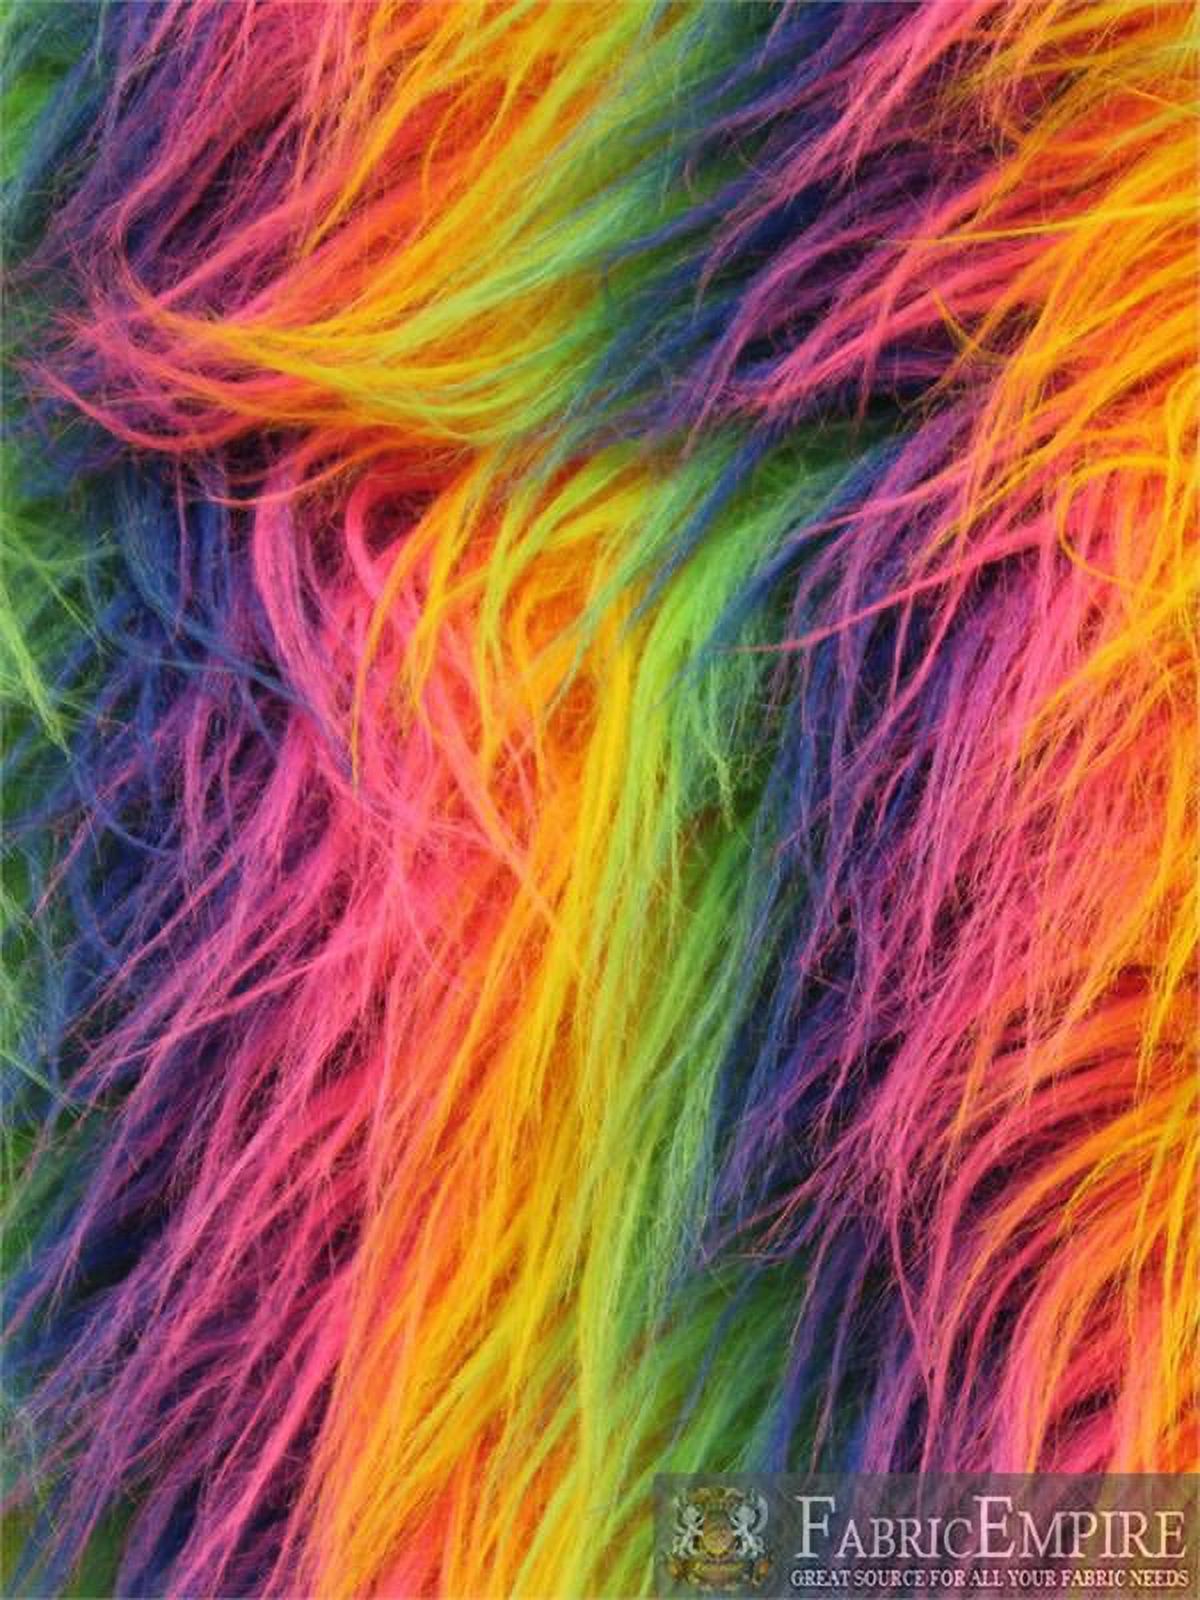 Faux Fur Fabric Long Pile GORILLA Rainbow Stripes / 60" Wide / Sold by the yard - image 2 of 5